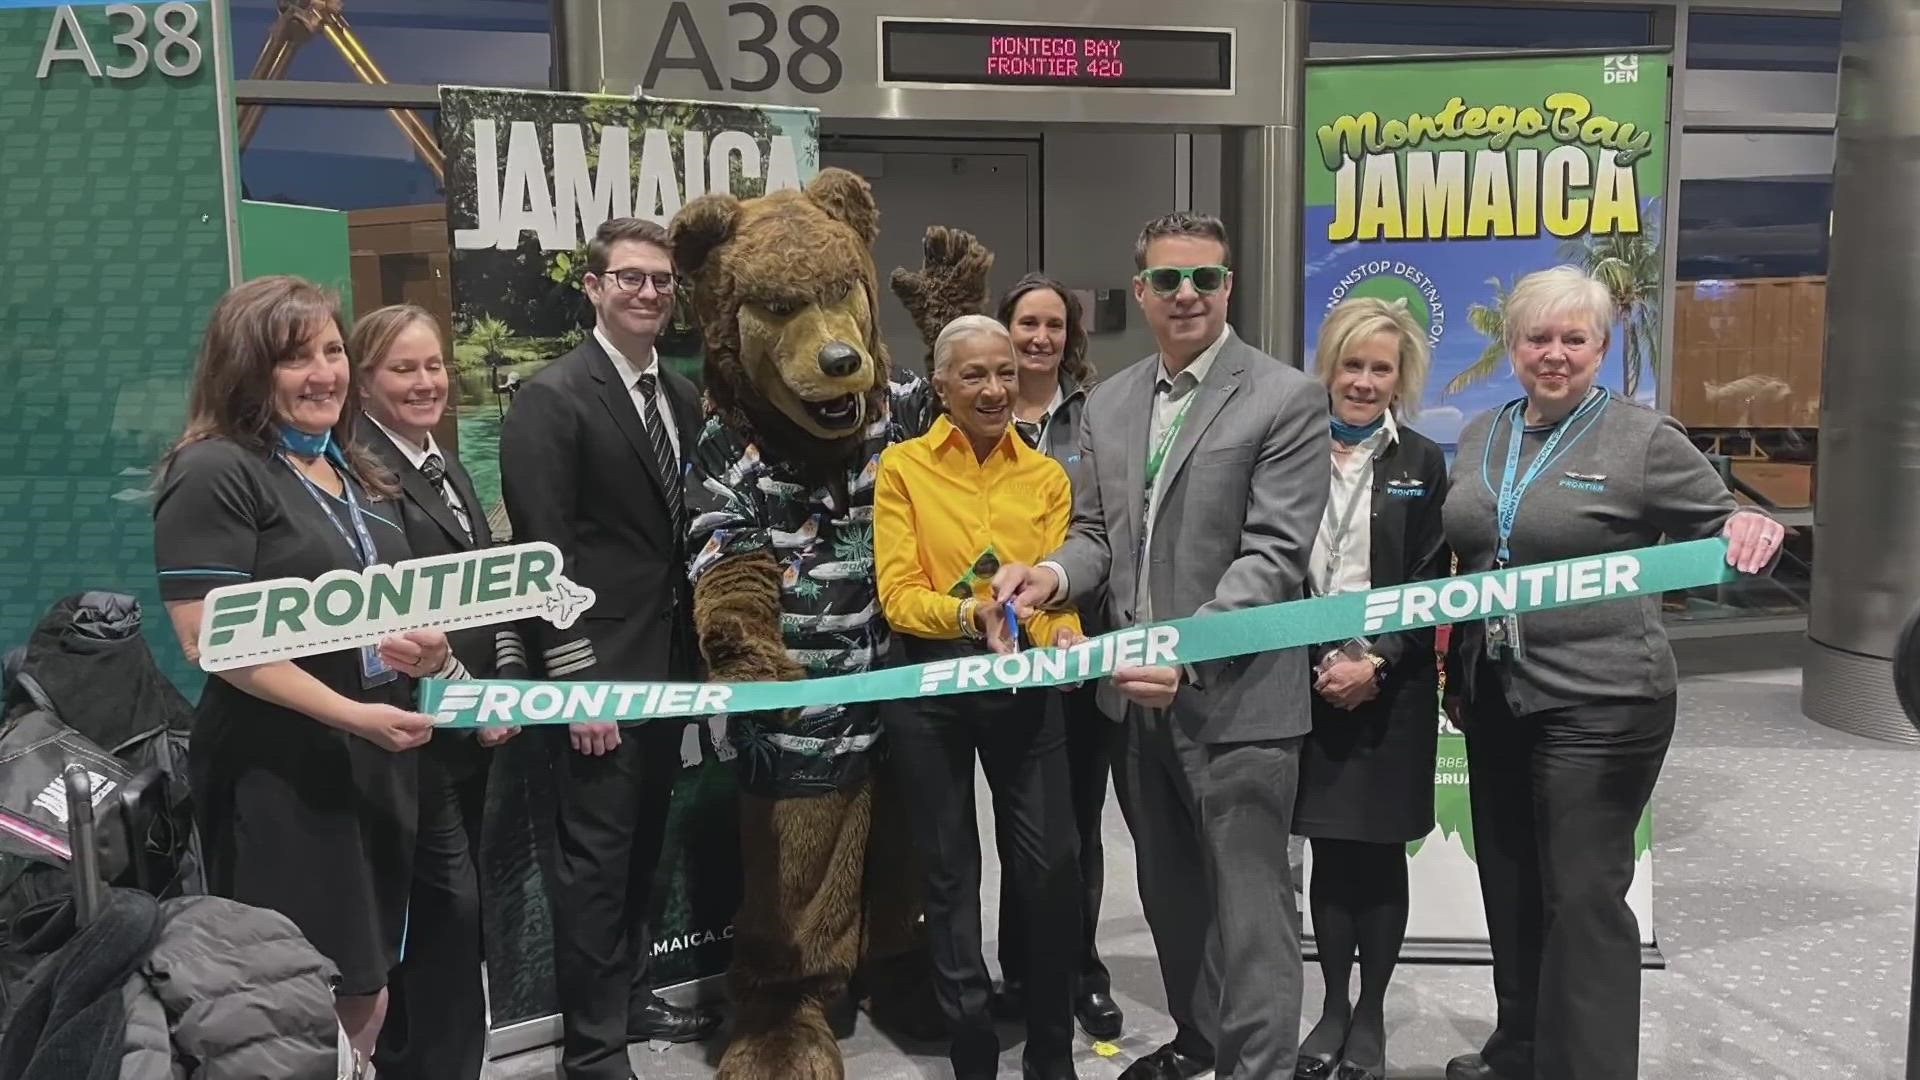 Frontier Airlines will serve 67 nonstop destinations from Denver's airport.